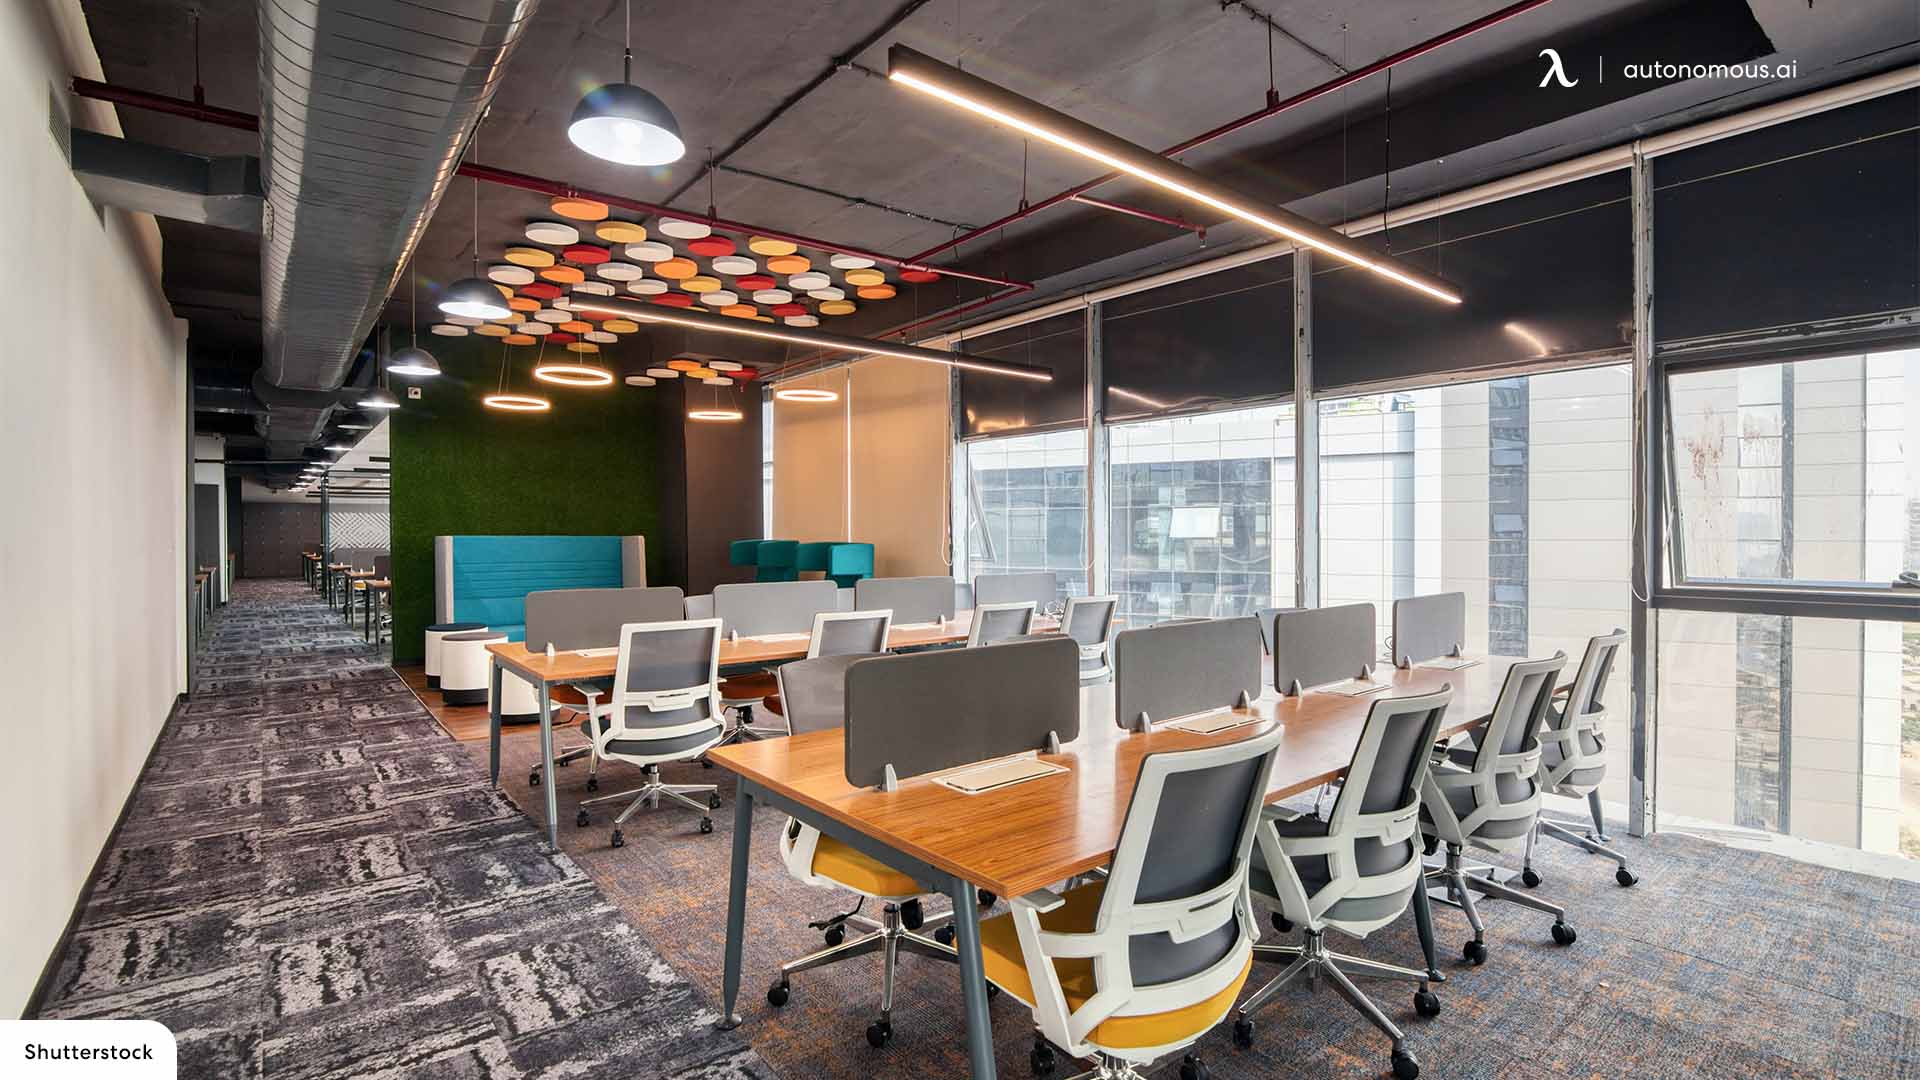 4 Office Space and Office Interior Design Ideas for 2022